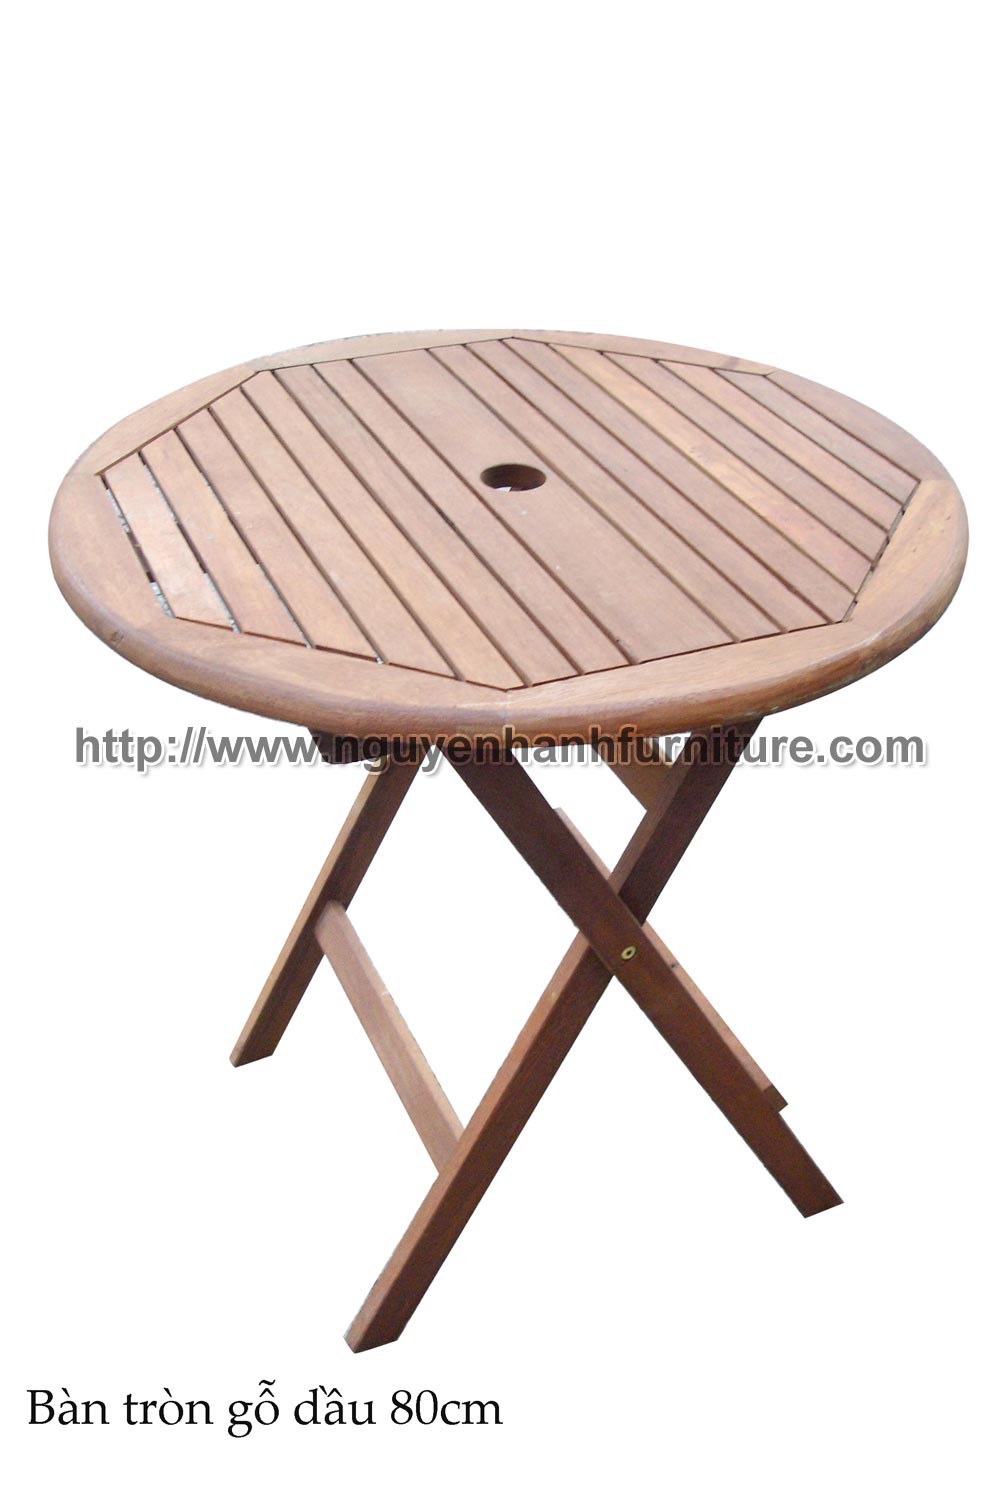 Name product: 0.8m Rounded table of Keruing wood - Dimensions: 80cm - Description: Red oil wood